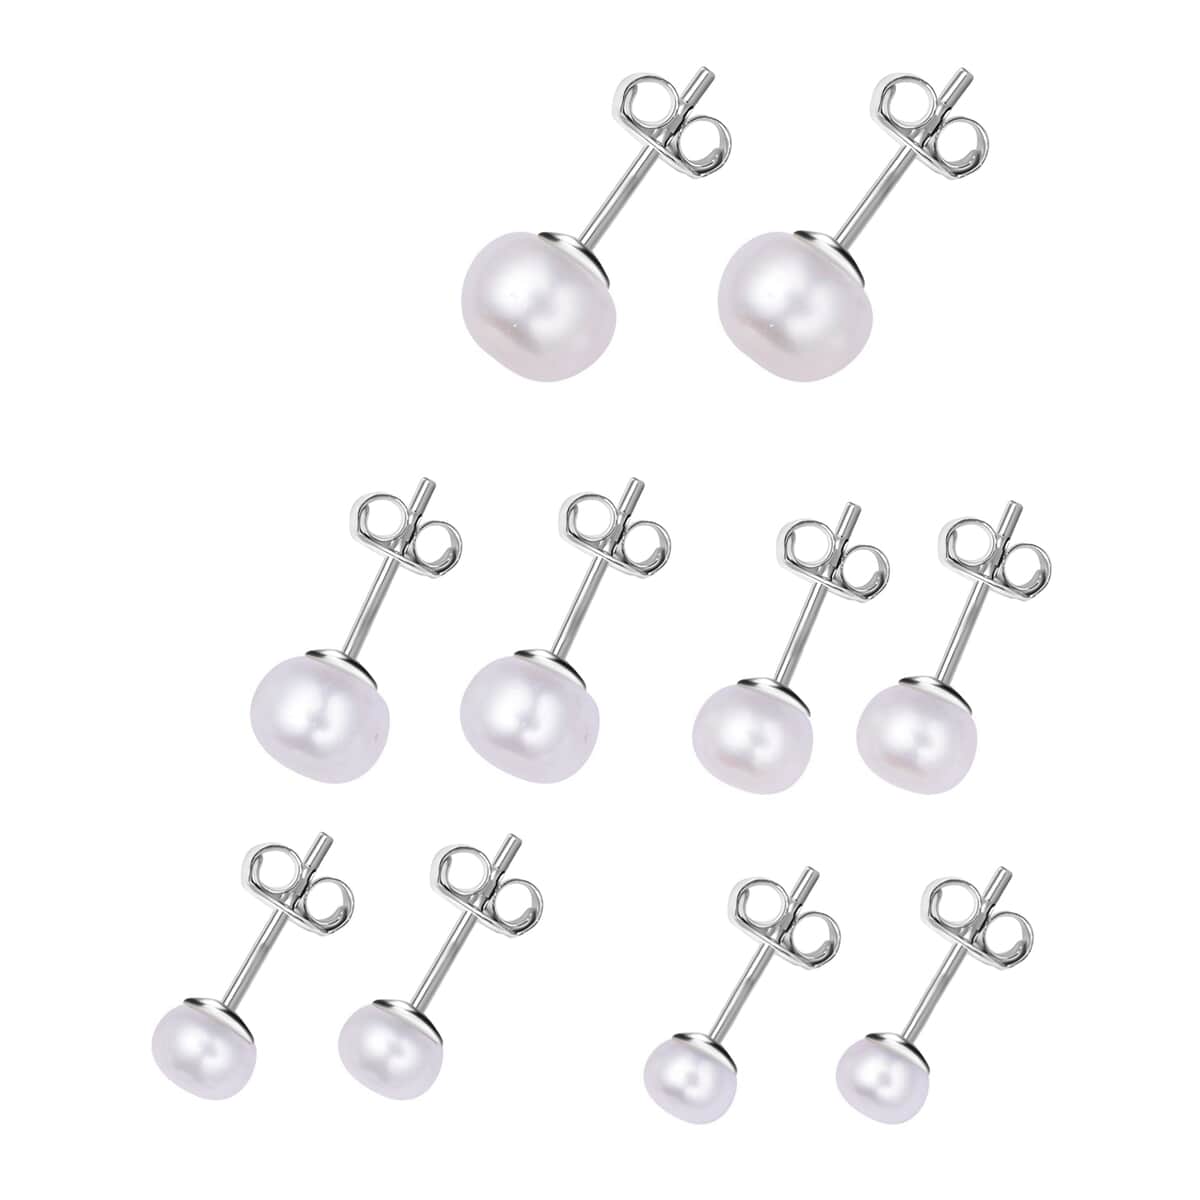 Set of 5 Freshwater Cultured White Pearl Stud Earrings in Stainless Steel| Solitaire Pearl Earrings| Pearl Jewelry For Women image number 2